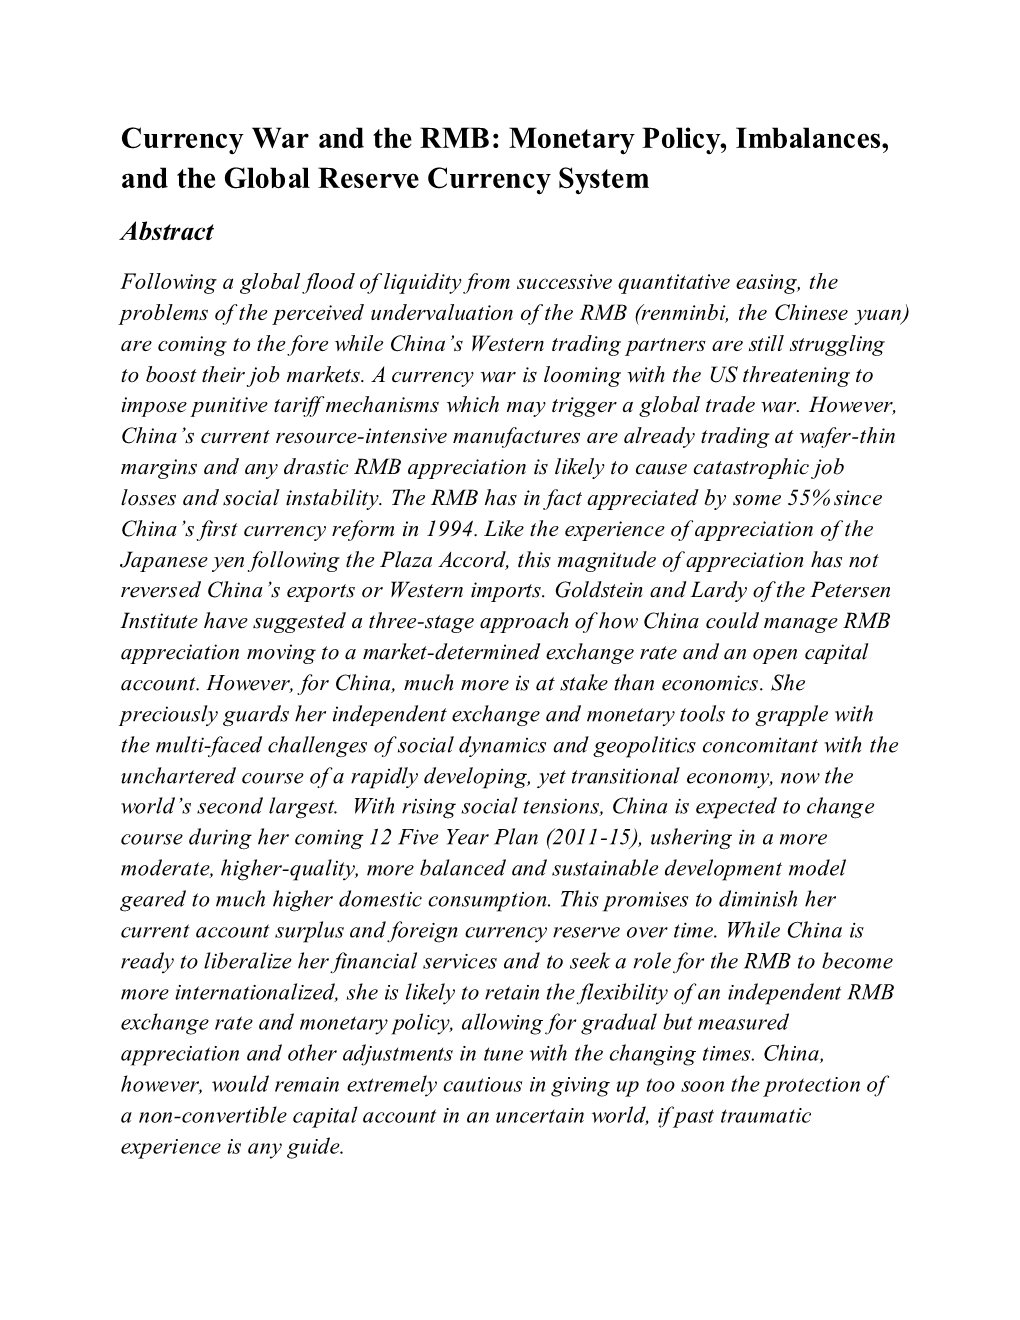 Currency War and the RMB: Monetary Policy, Imbalances, and the Global Reserve Currency System Abstract